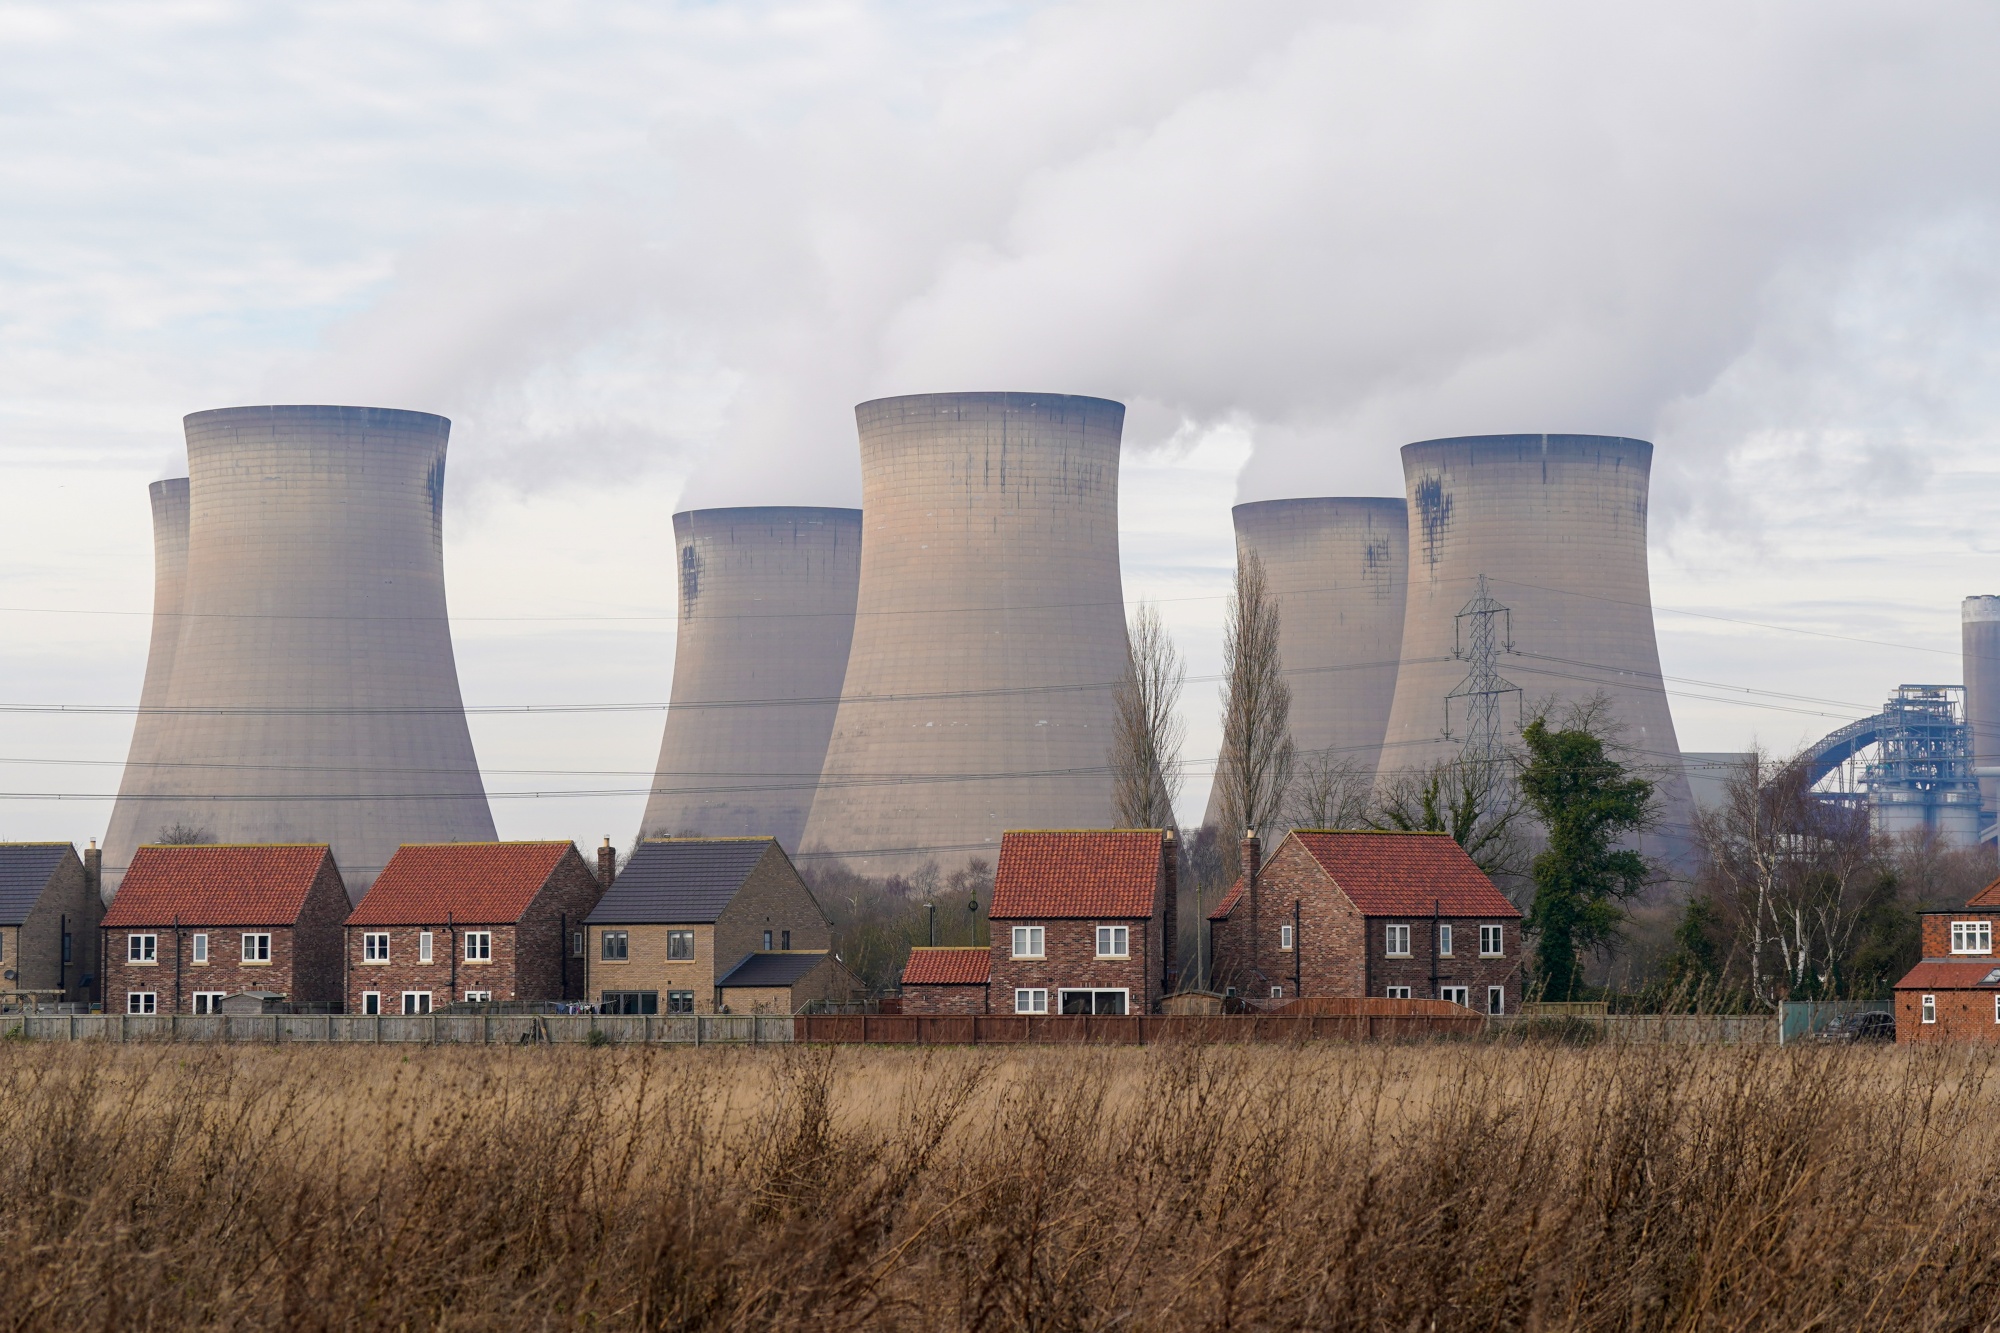 The future of Drax: old, inefficient, damaging and expensive